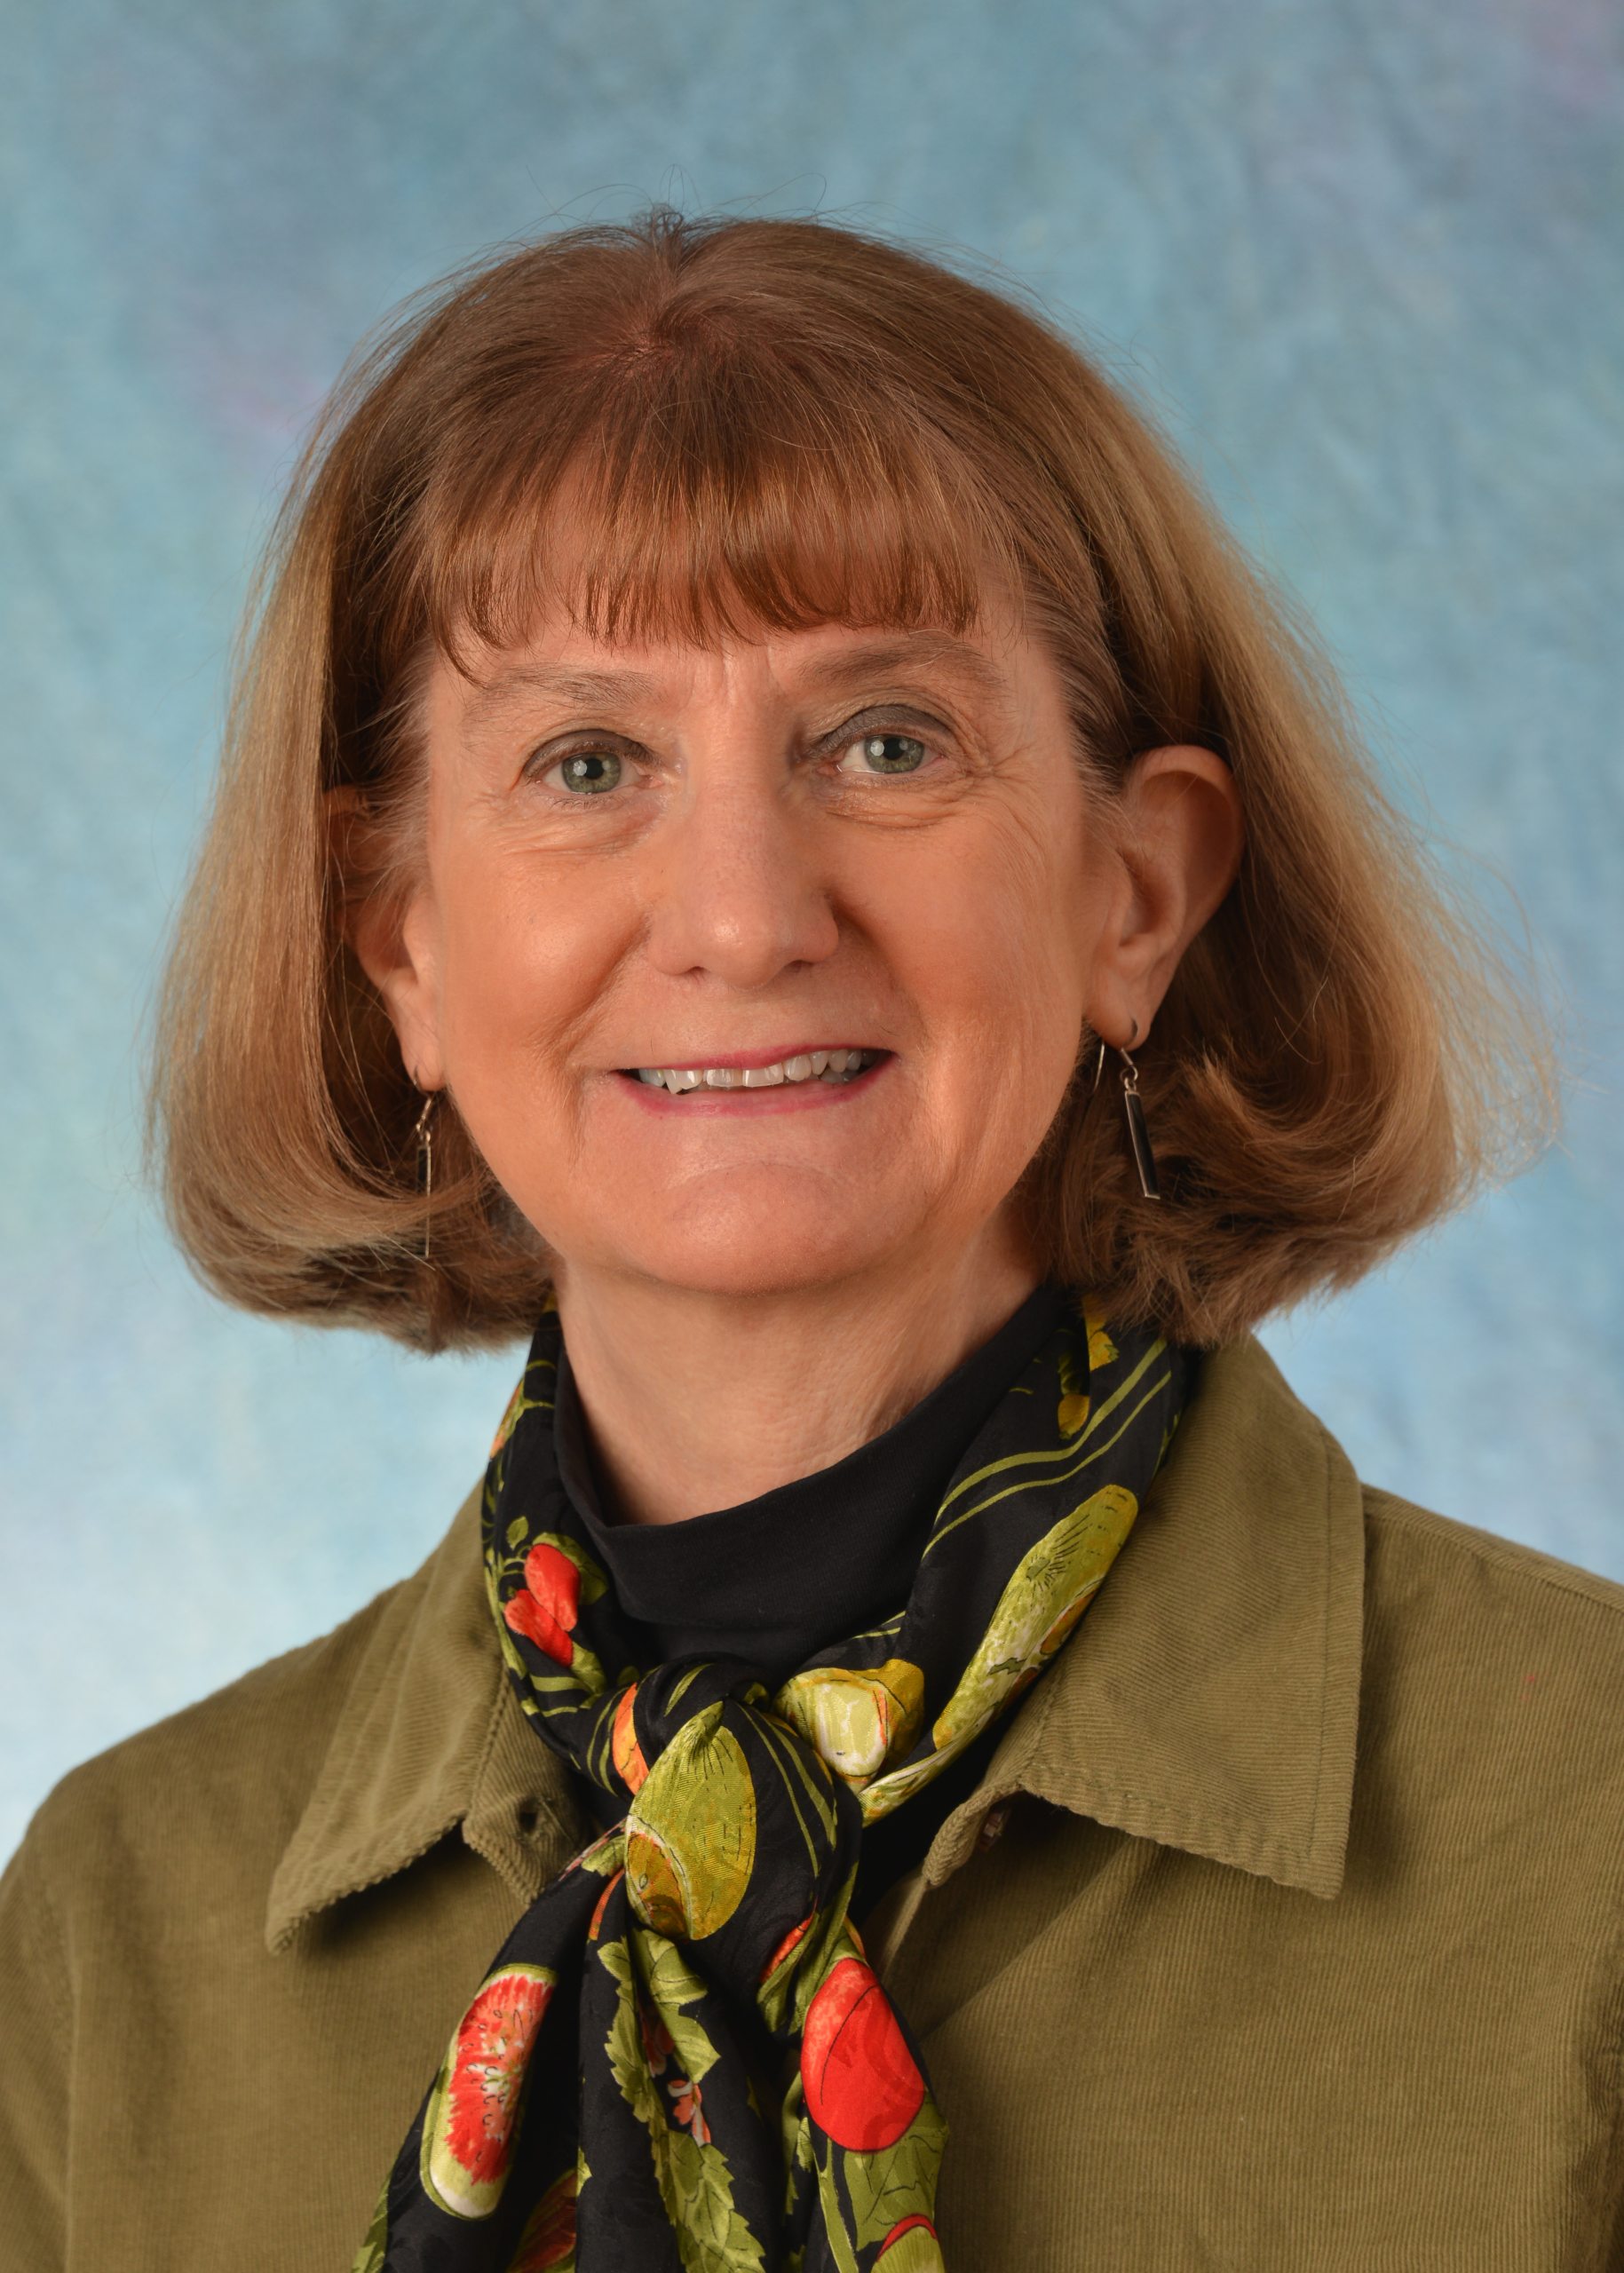 Susan Beck smiling at the camera with a green collared overshirt and a black floral patterned scarf against a blue background.